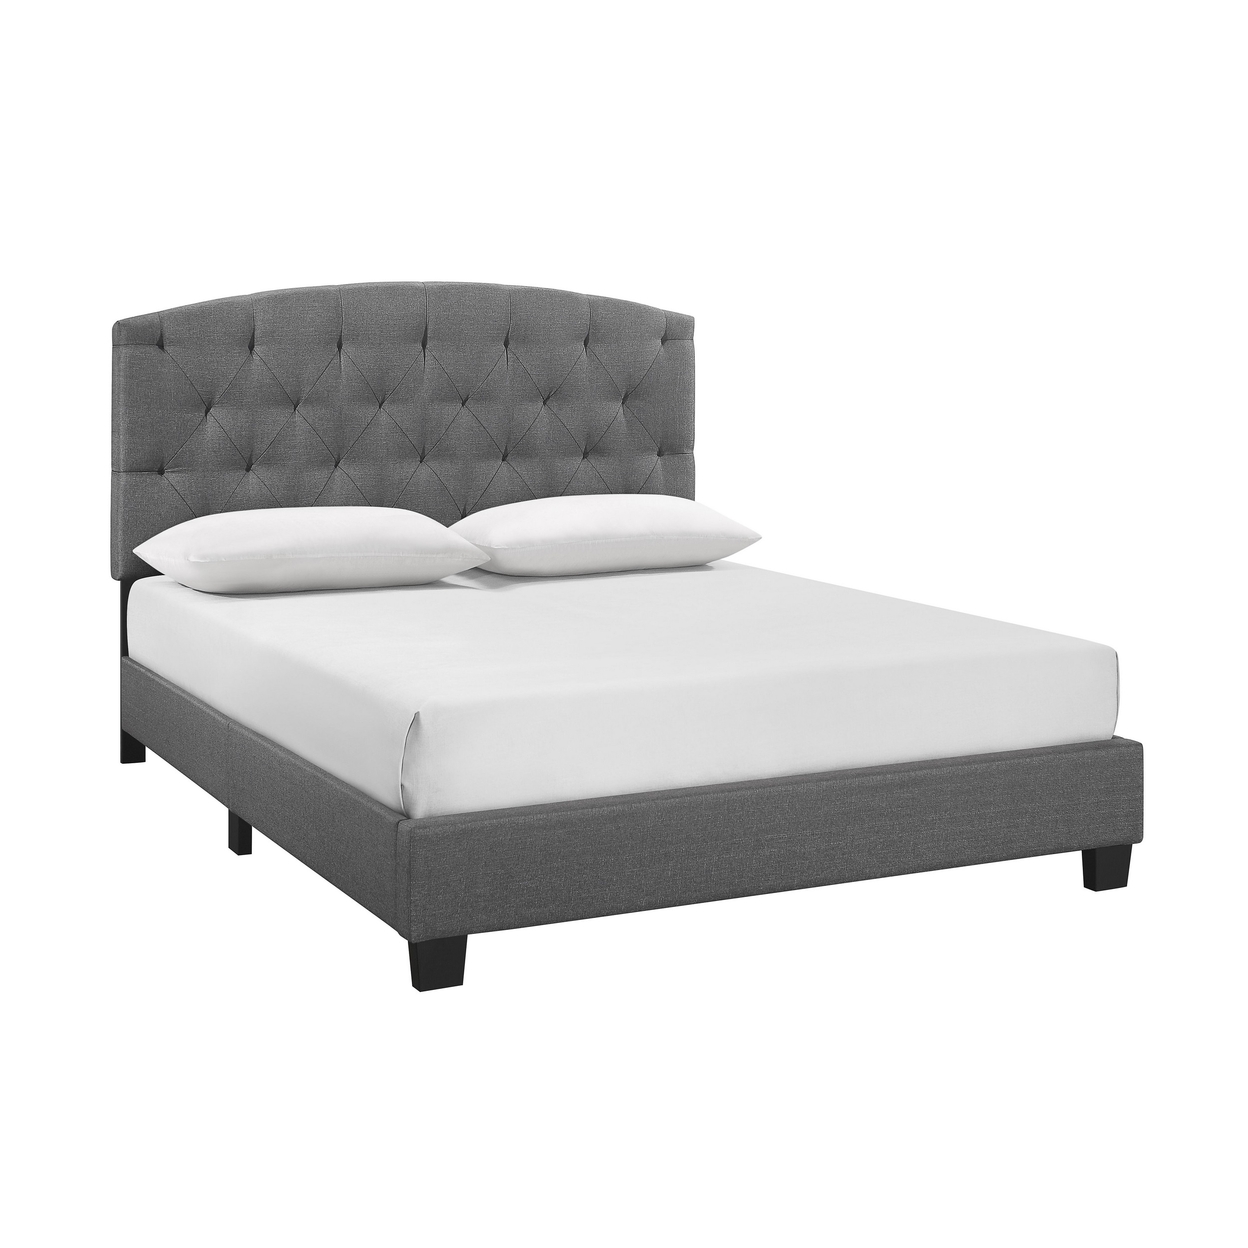 Dane Queen Size Bed, Fully Upholstered, Tufted Curved Headboard, Light Gray- Saltoro Sherpi